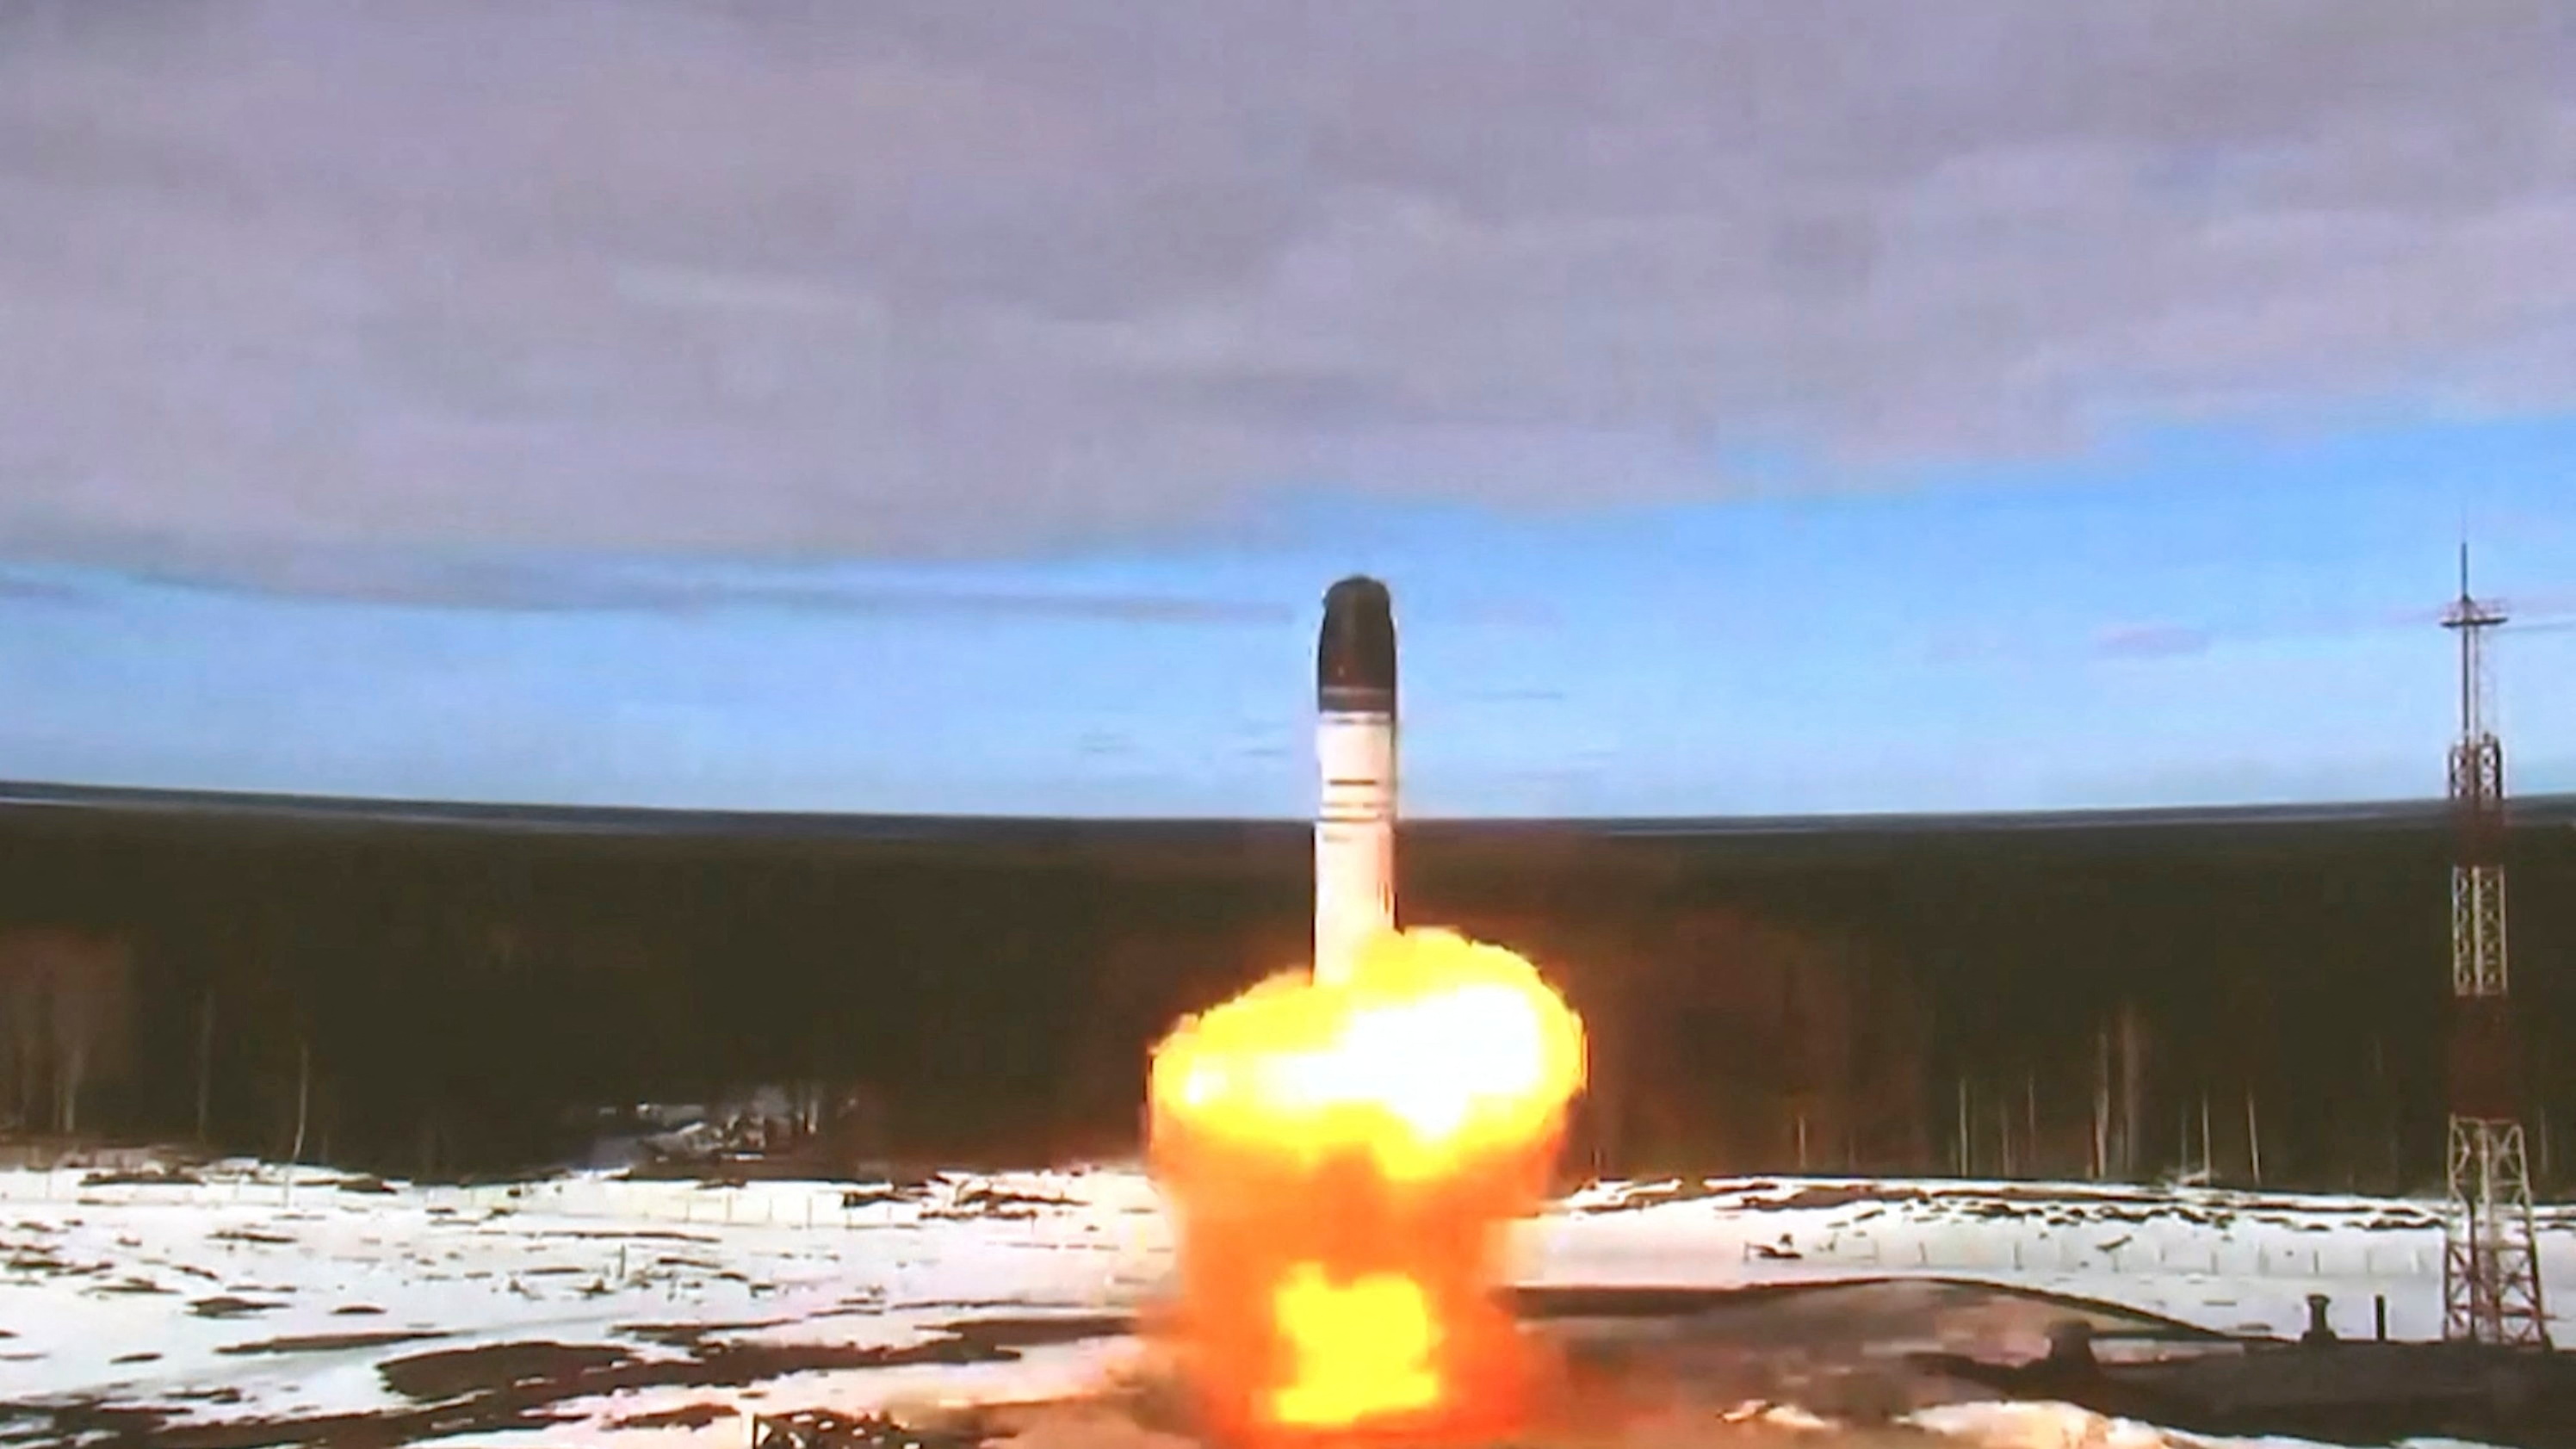 Russia tests nuclear-capable missile that Putin calls world's best | Reuters